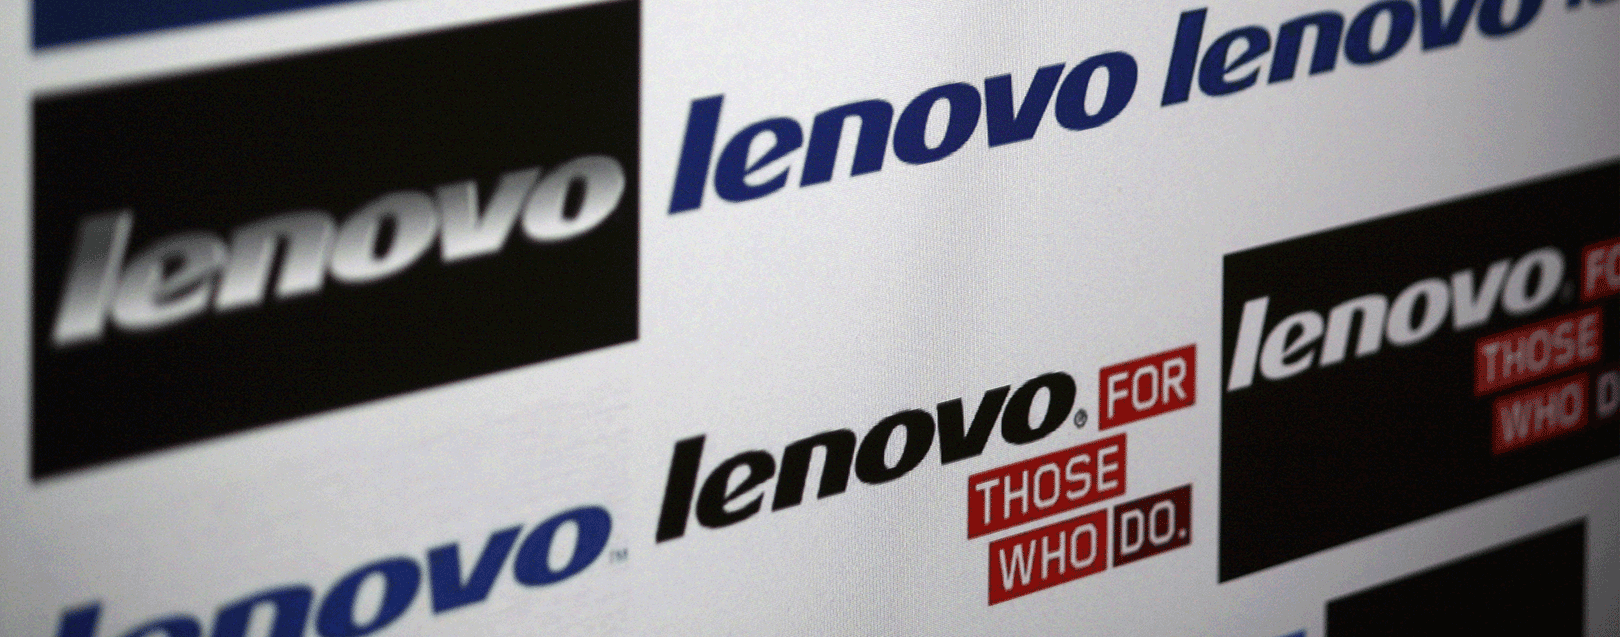 Lenovo to manufacture laptops in India